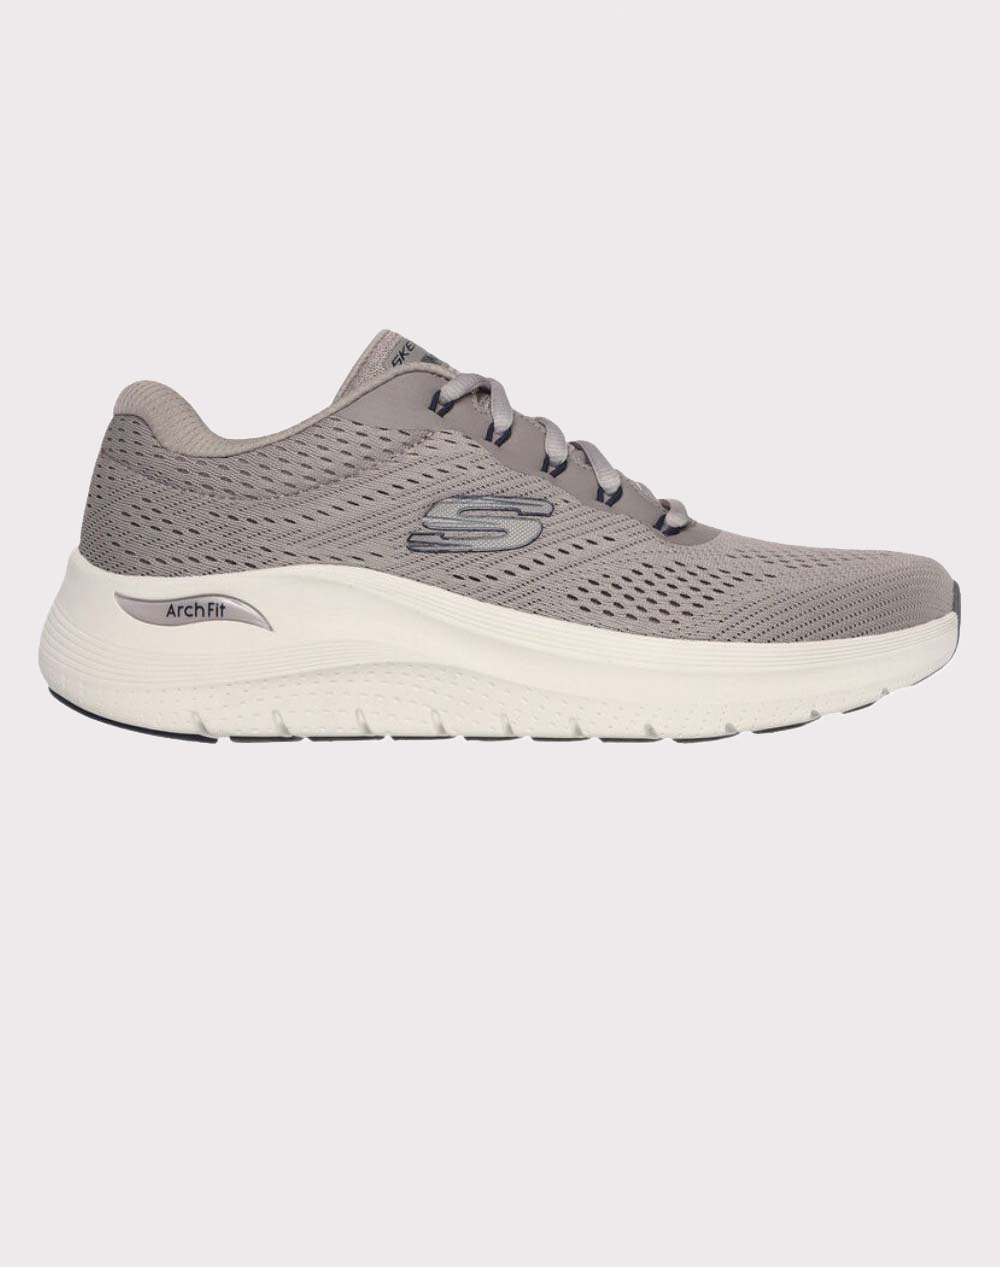 SKECHERS Arch Fit Engineered Mesh Lace Up 232700_TPE-TPE Gray 3820TSKEC6070117_XR17546